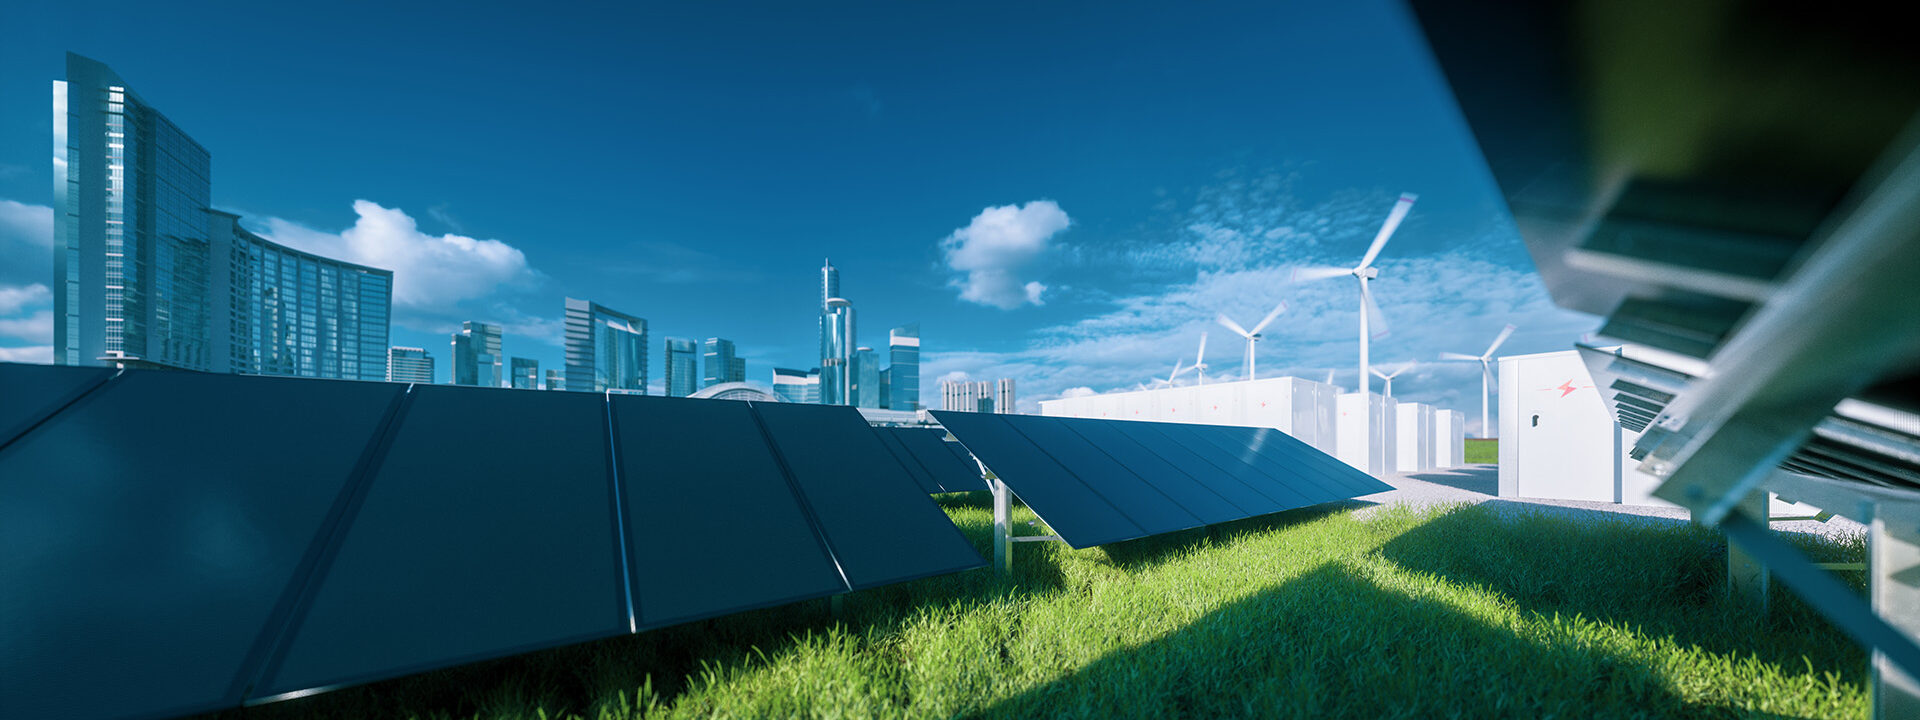 Solar panels and wind turbines in front of a cityscape.